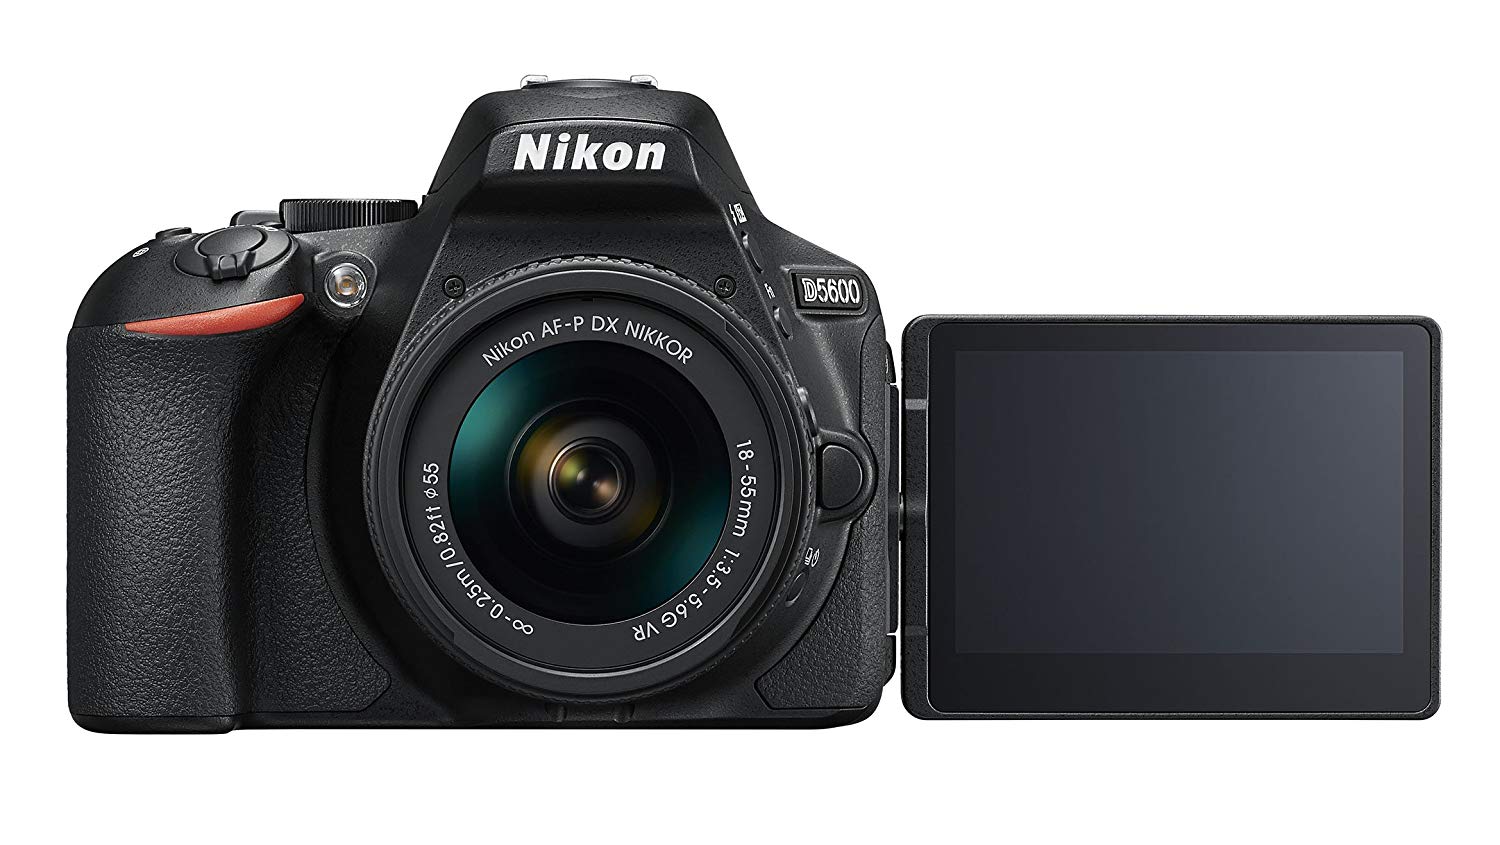 Nikon D5600 DSLR camera body with screen flipped out